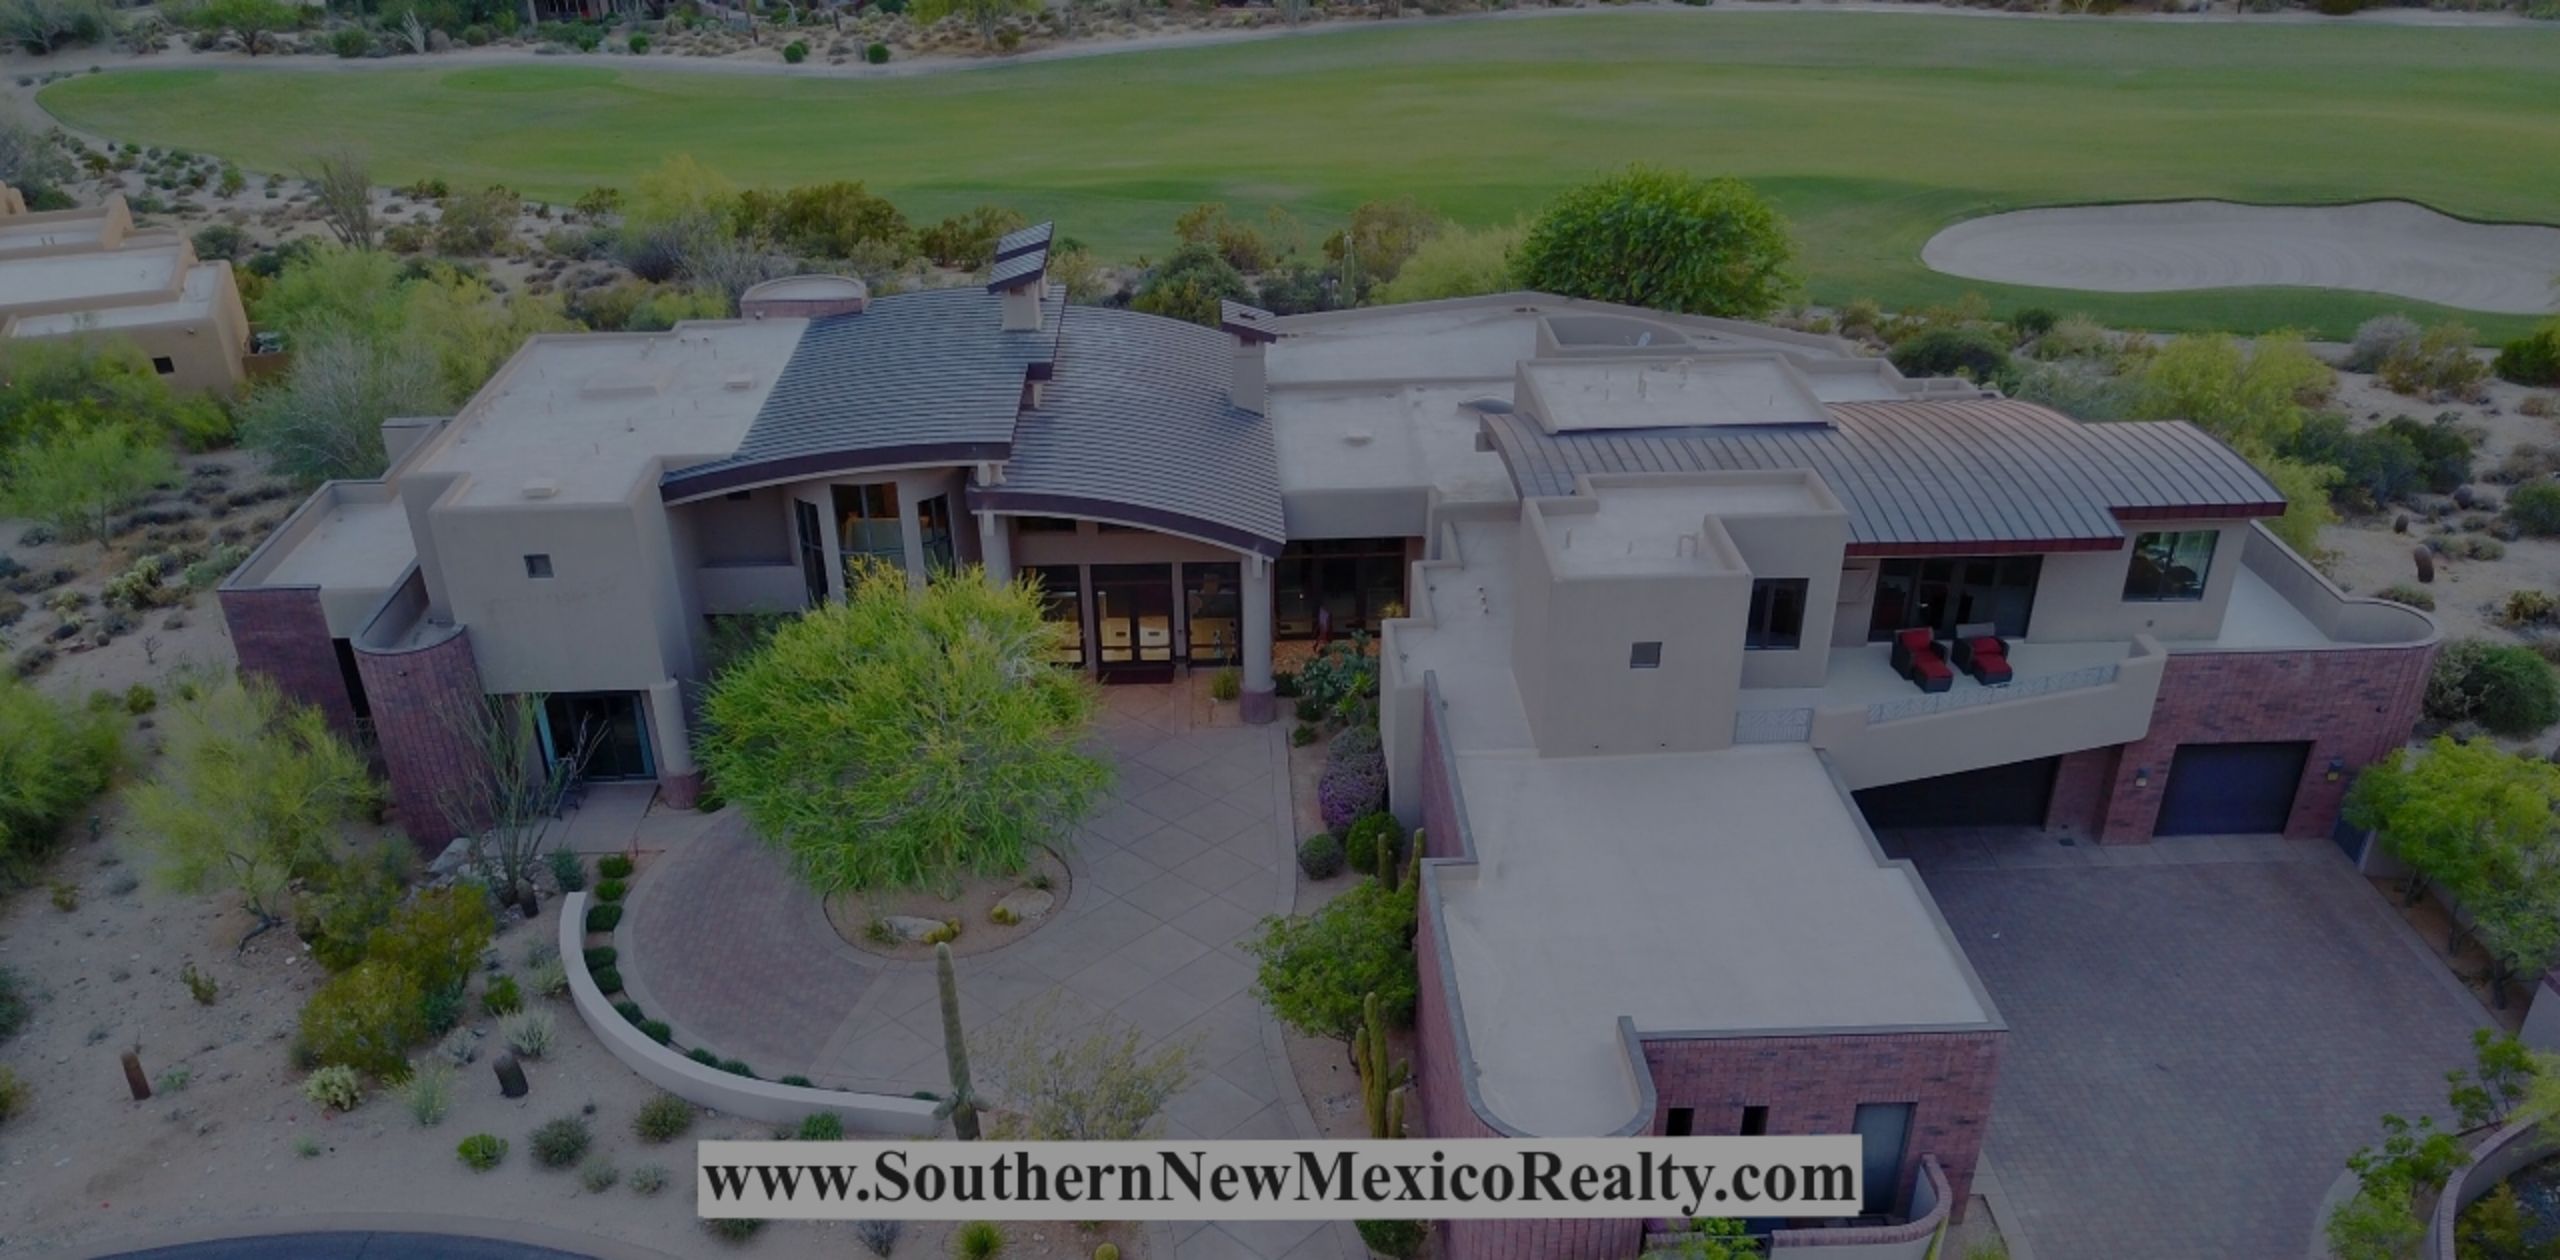 6 Home Buyer Questions and Answers When Buying a House in Ruidoso, NM